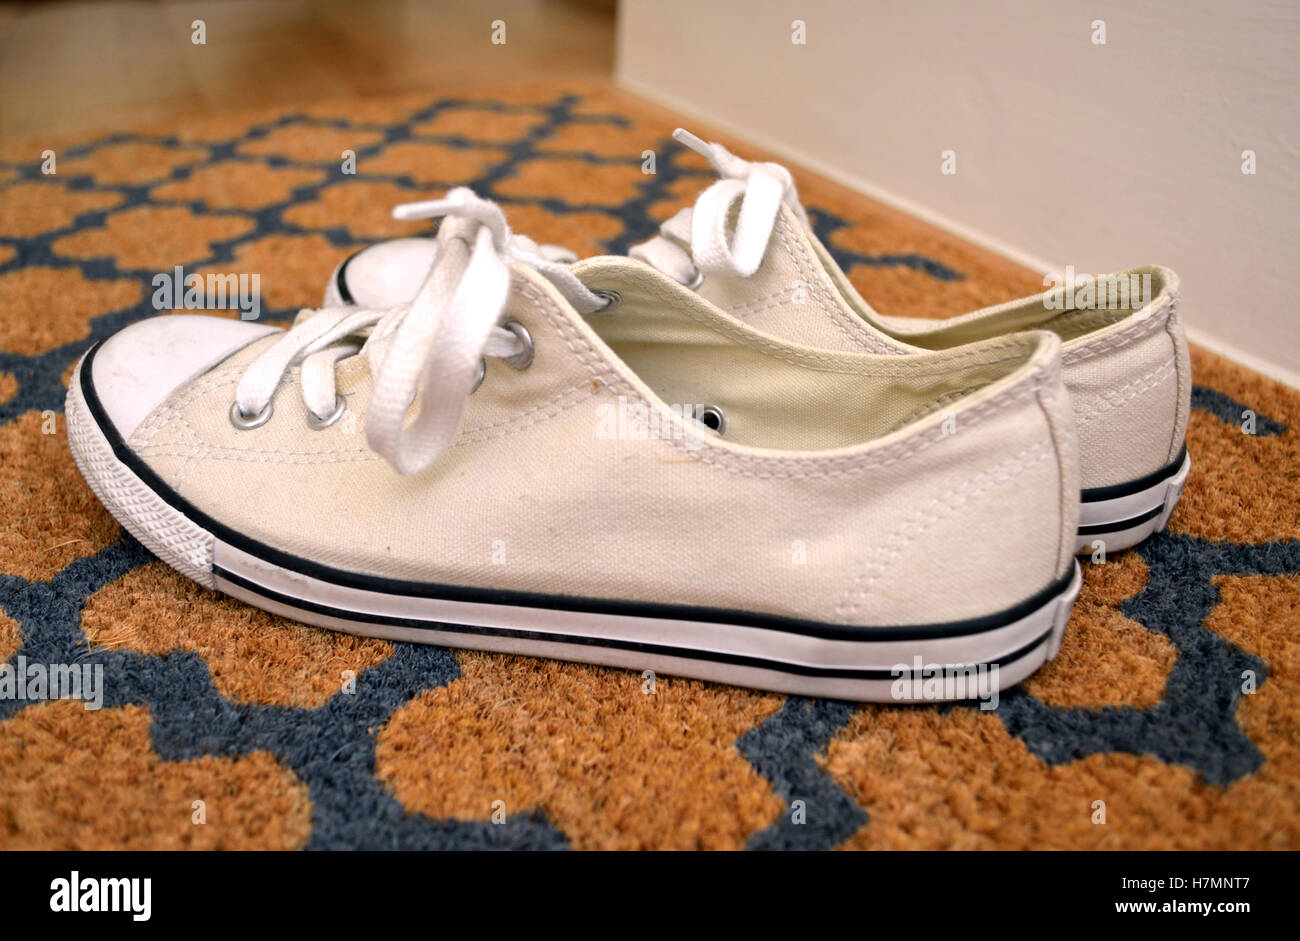 Closeup of a pair of white colured Converse All star trainers on a doormat. Stock Photo